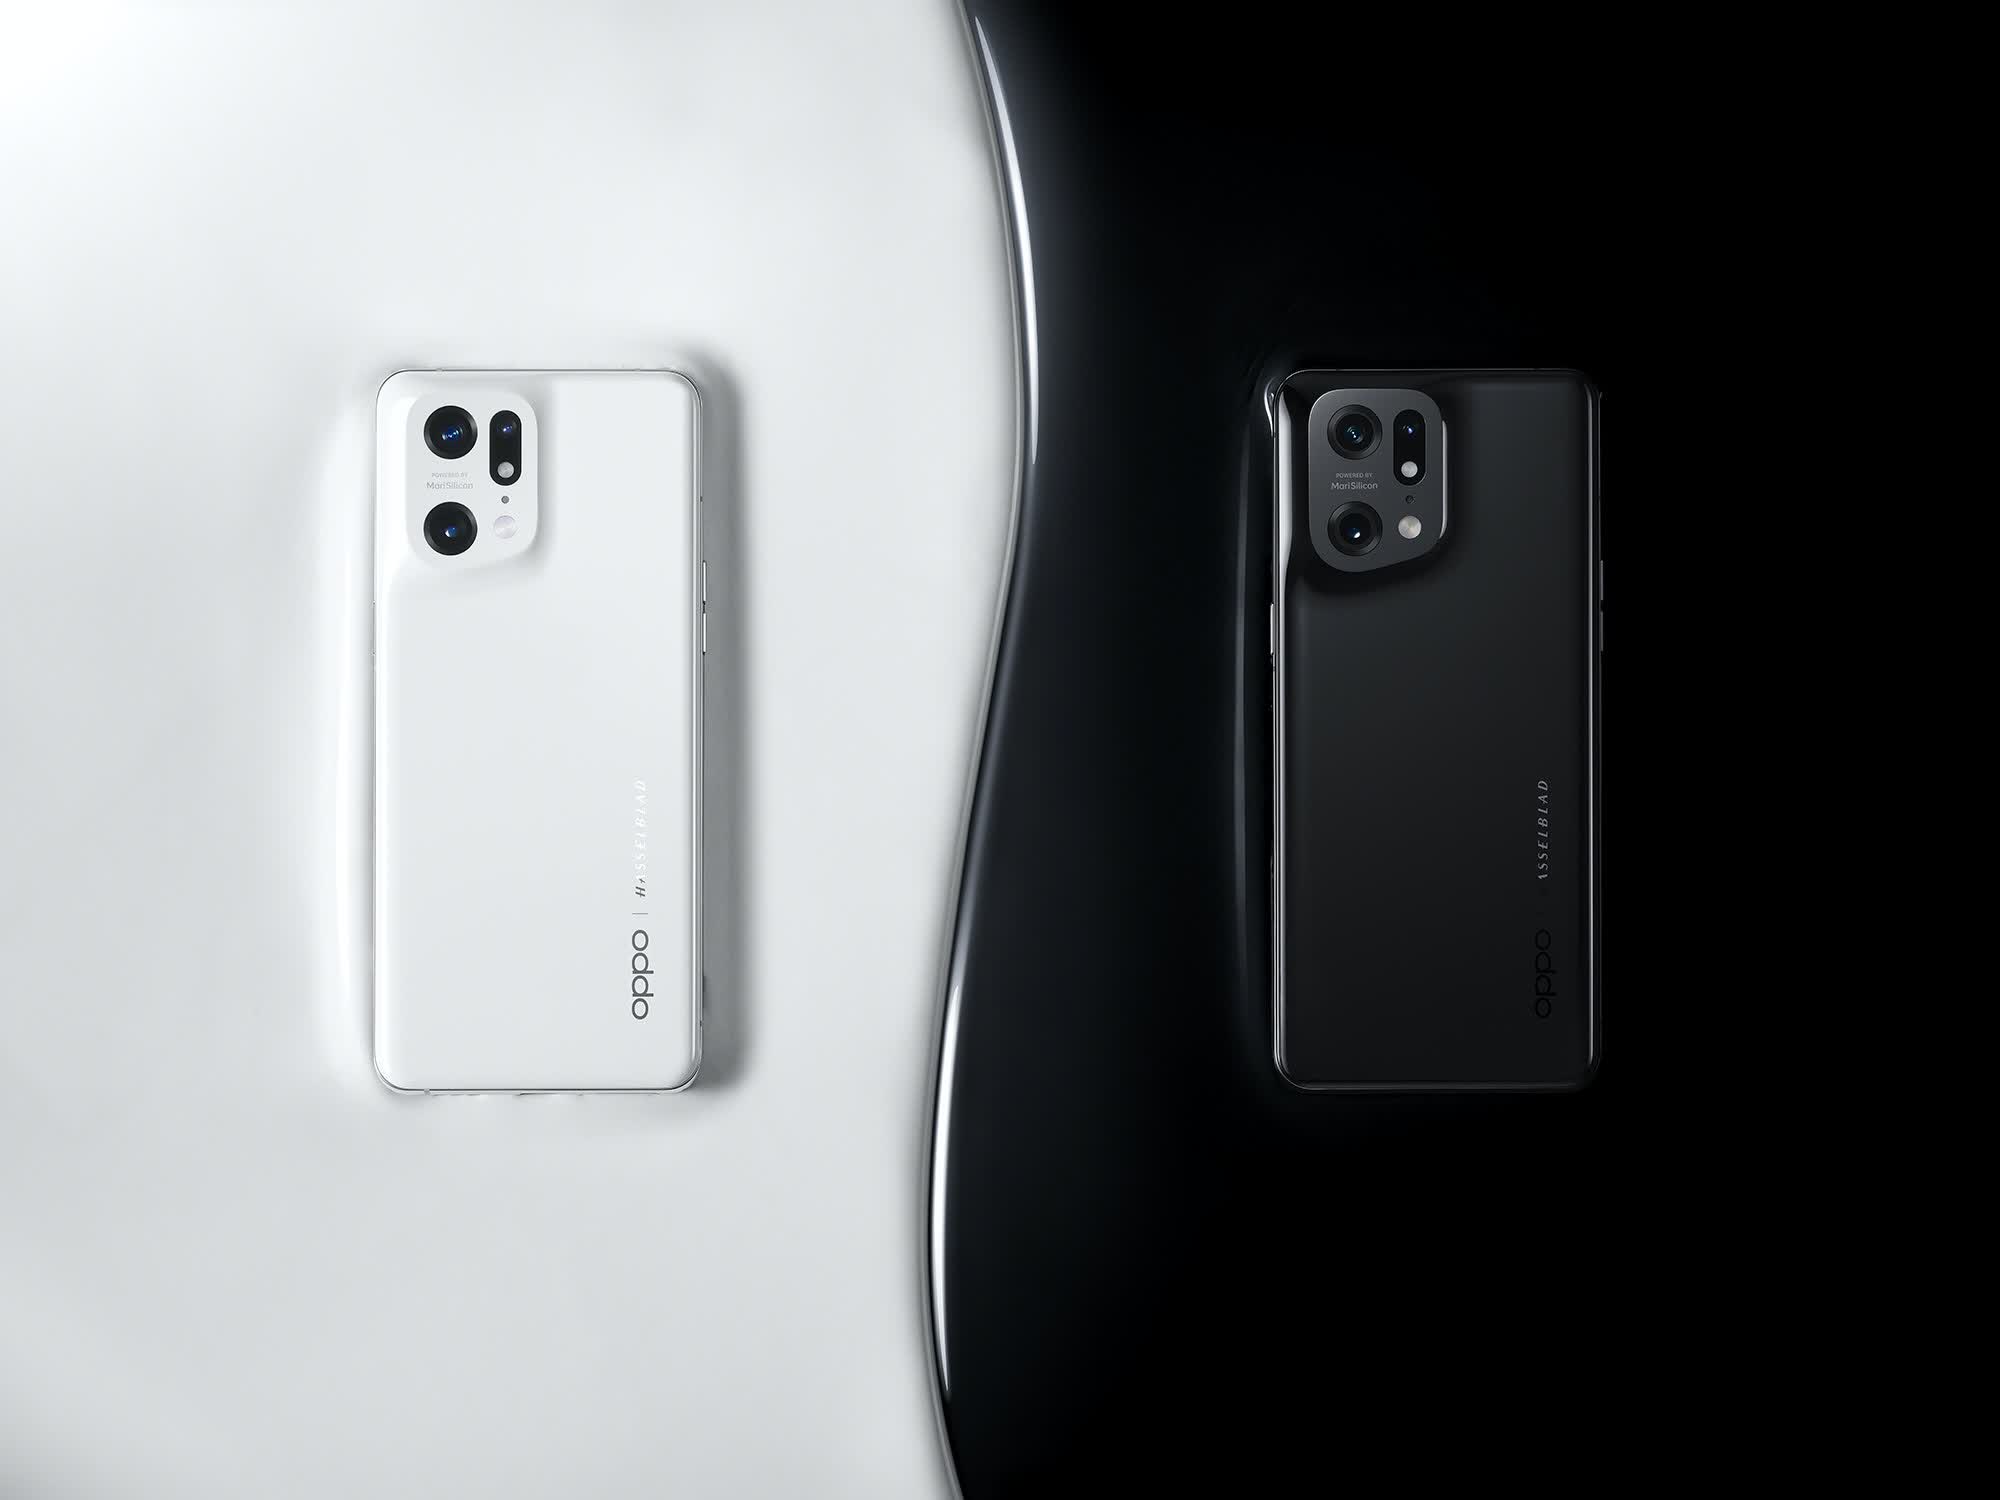 Oppo unveils Find X5 and Find X5 Pro flagships with self-made imaging NPU chipset